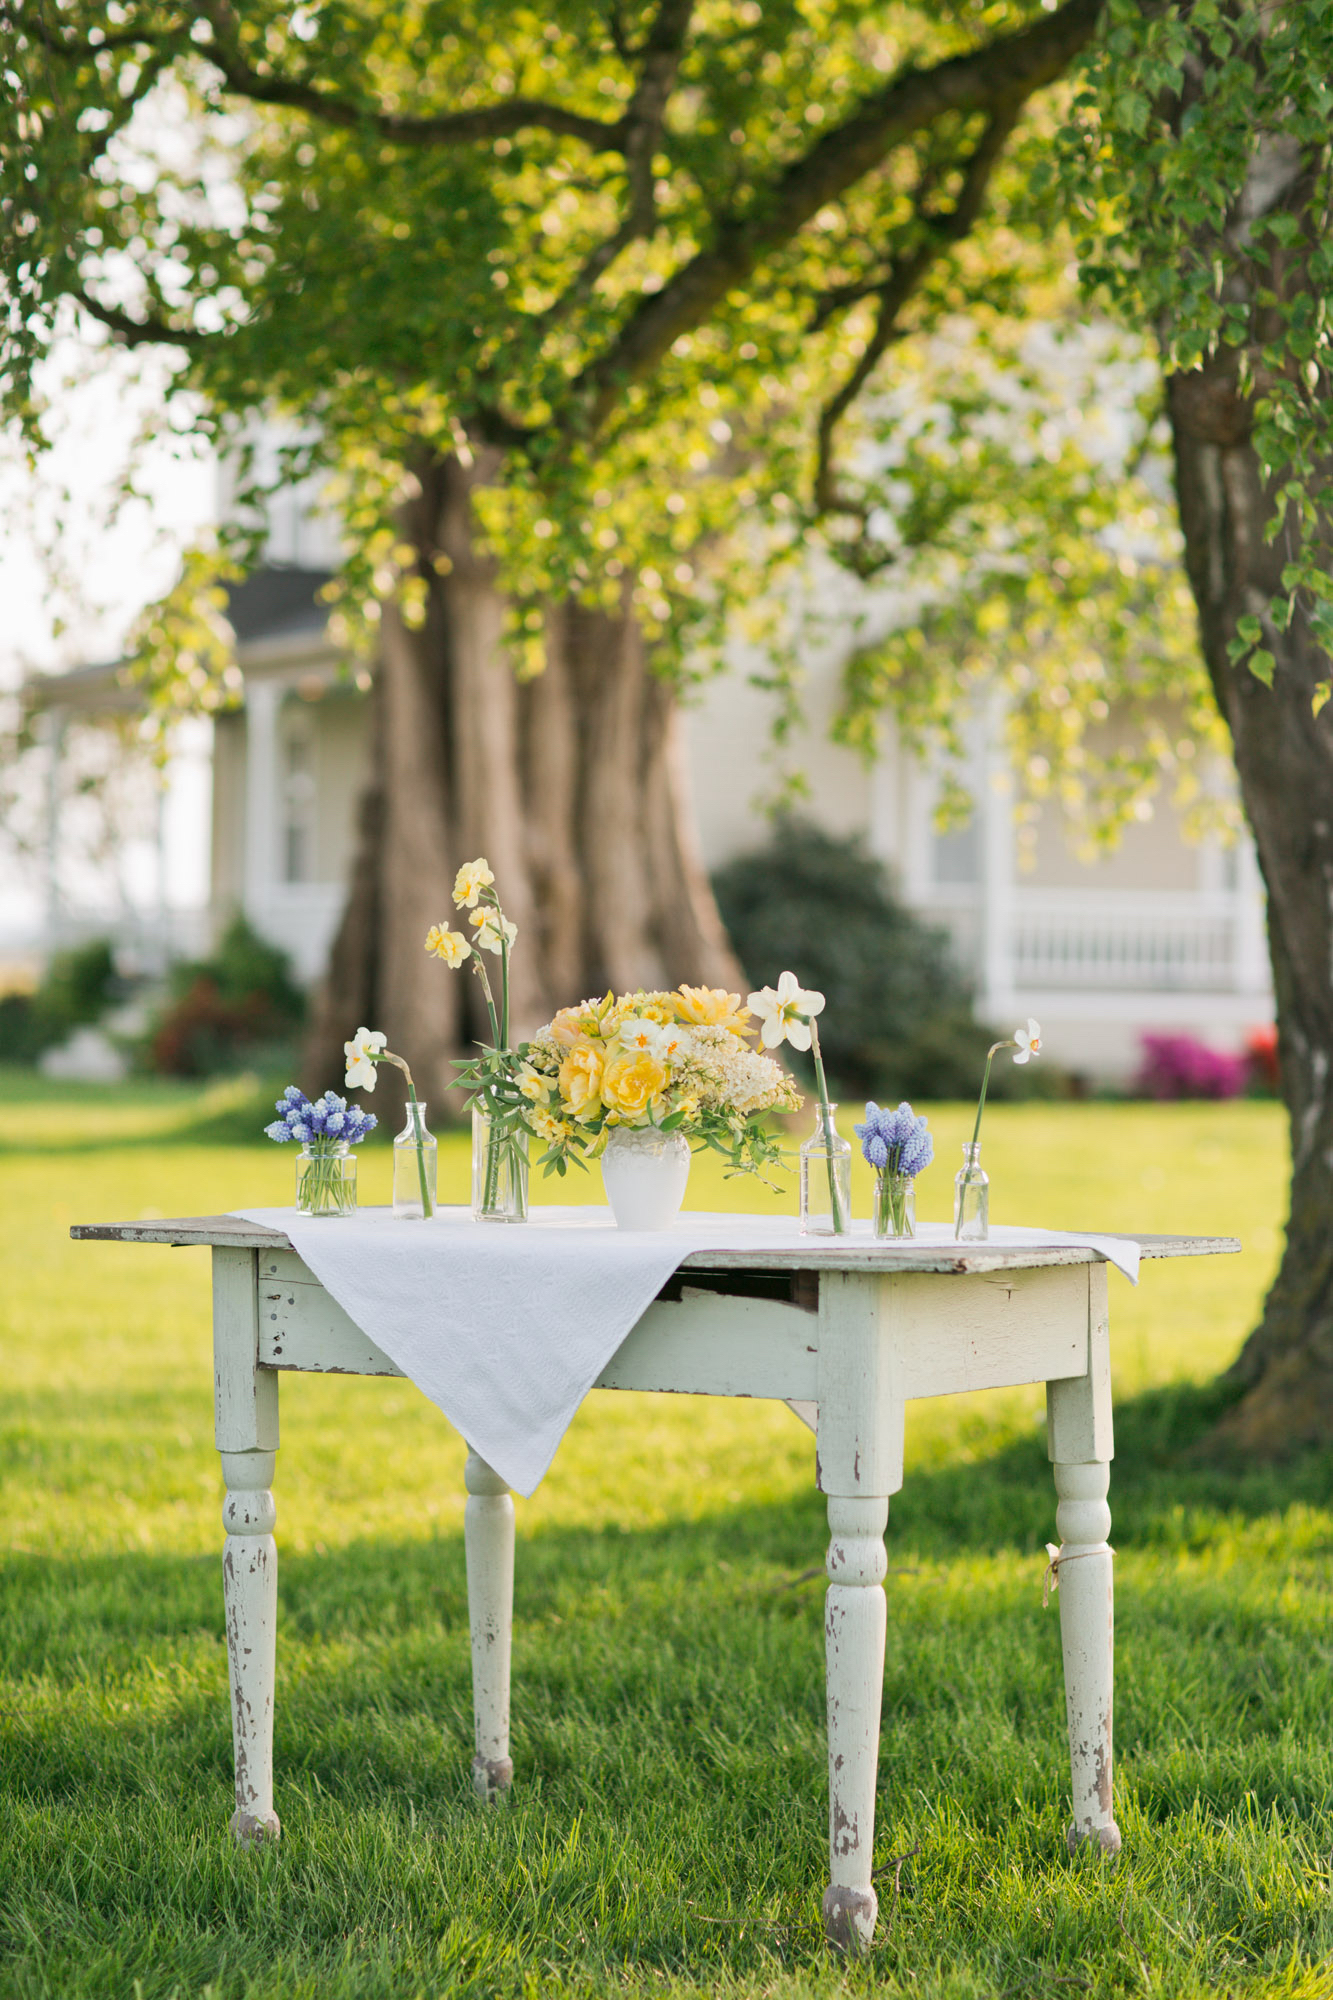 Vases of flowers on a table outdoors